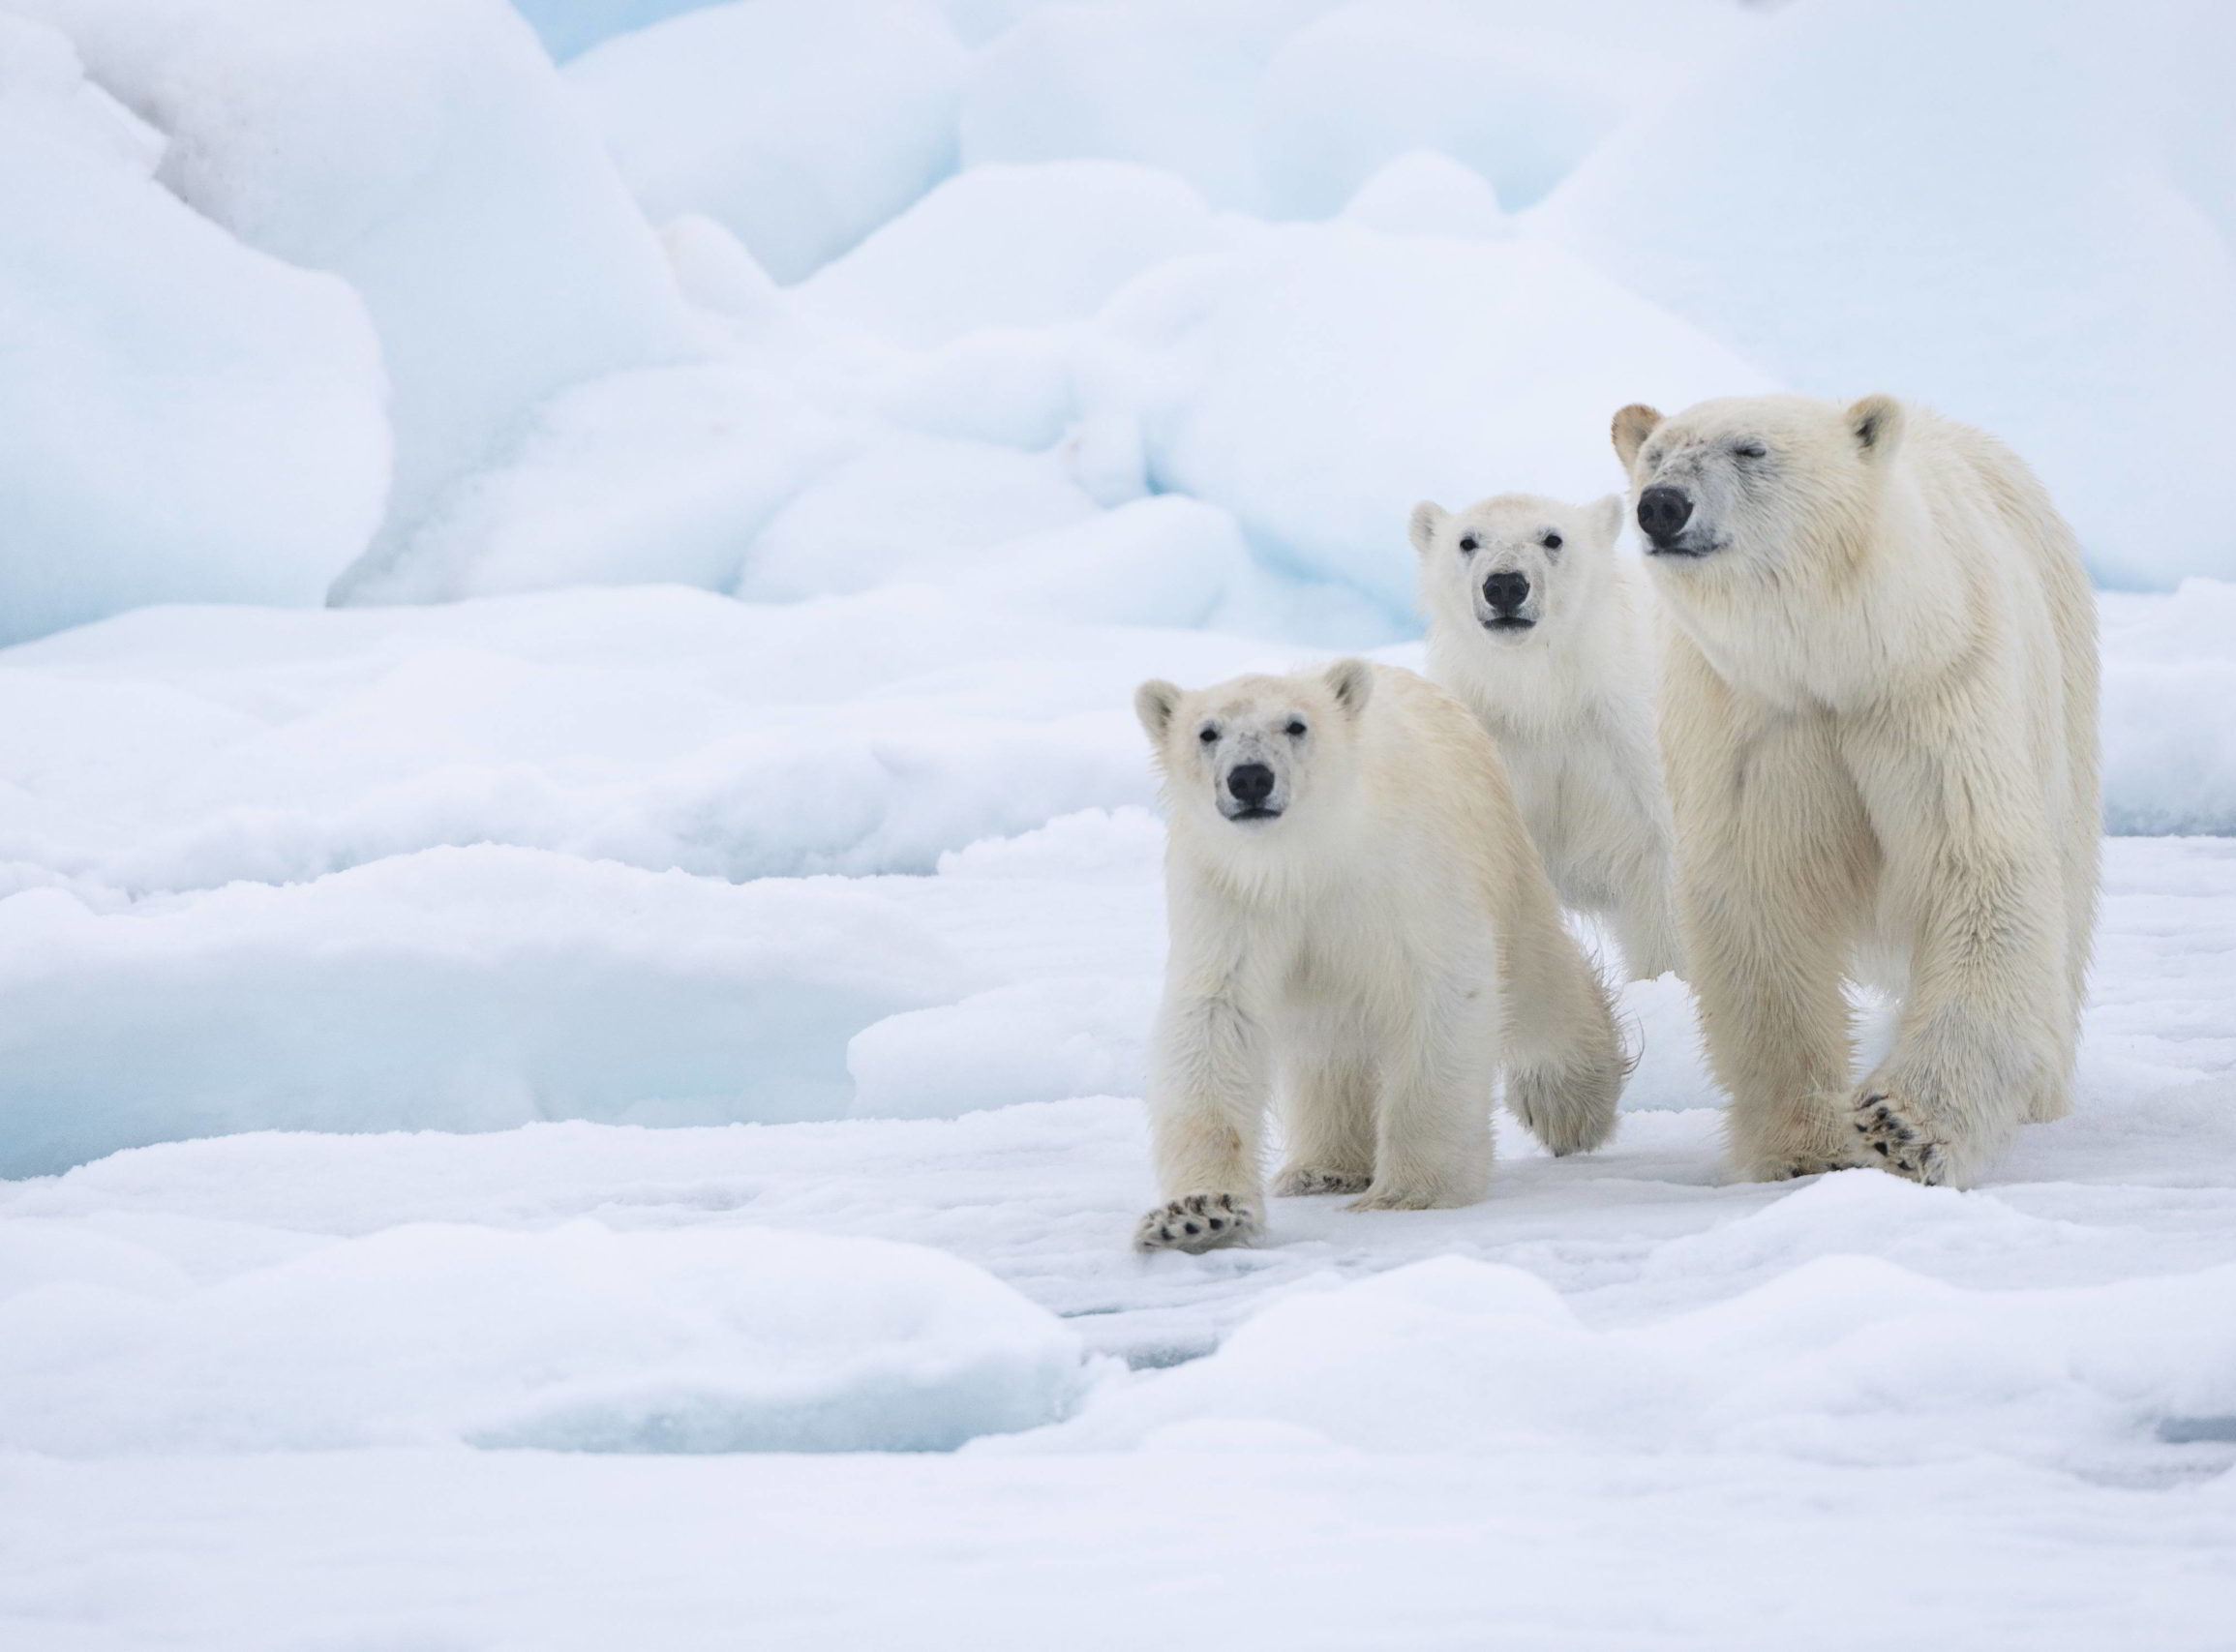 Polar bear mother and cubs walking on ice.